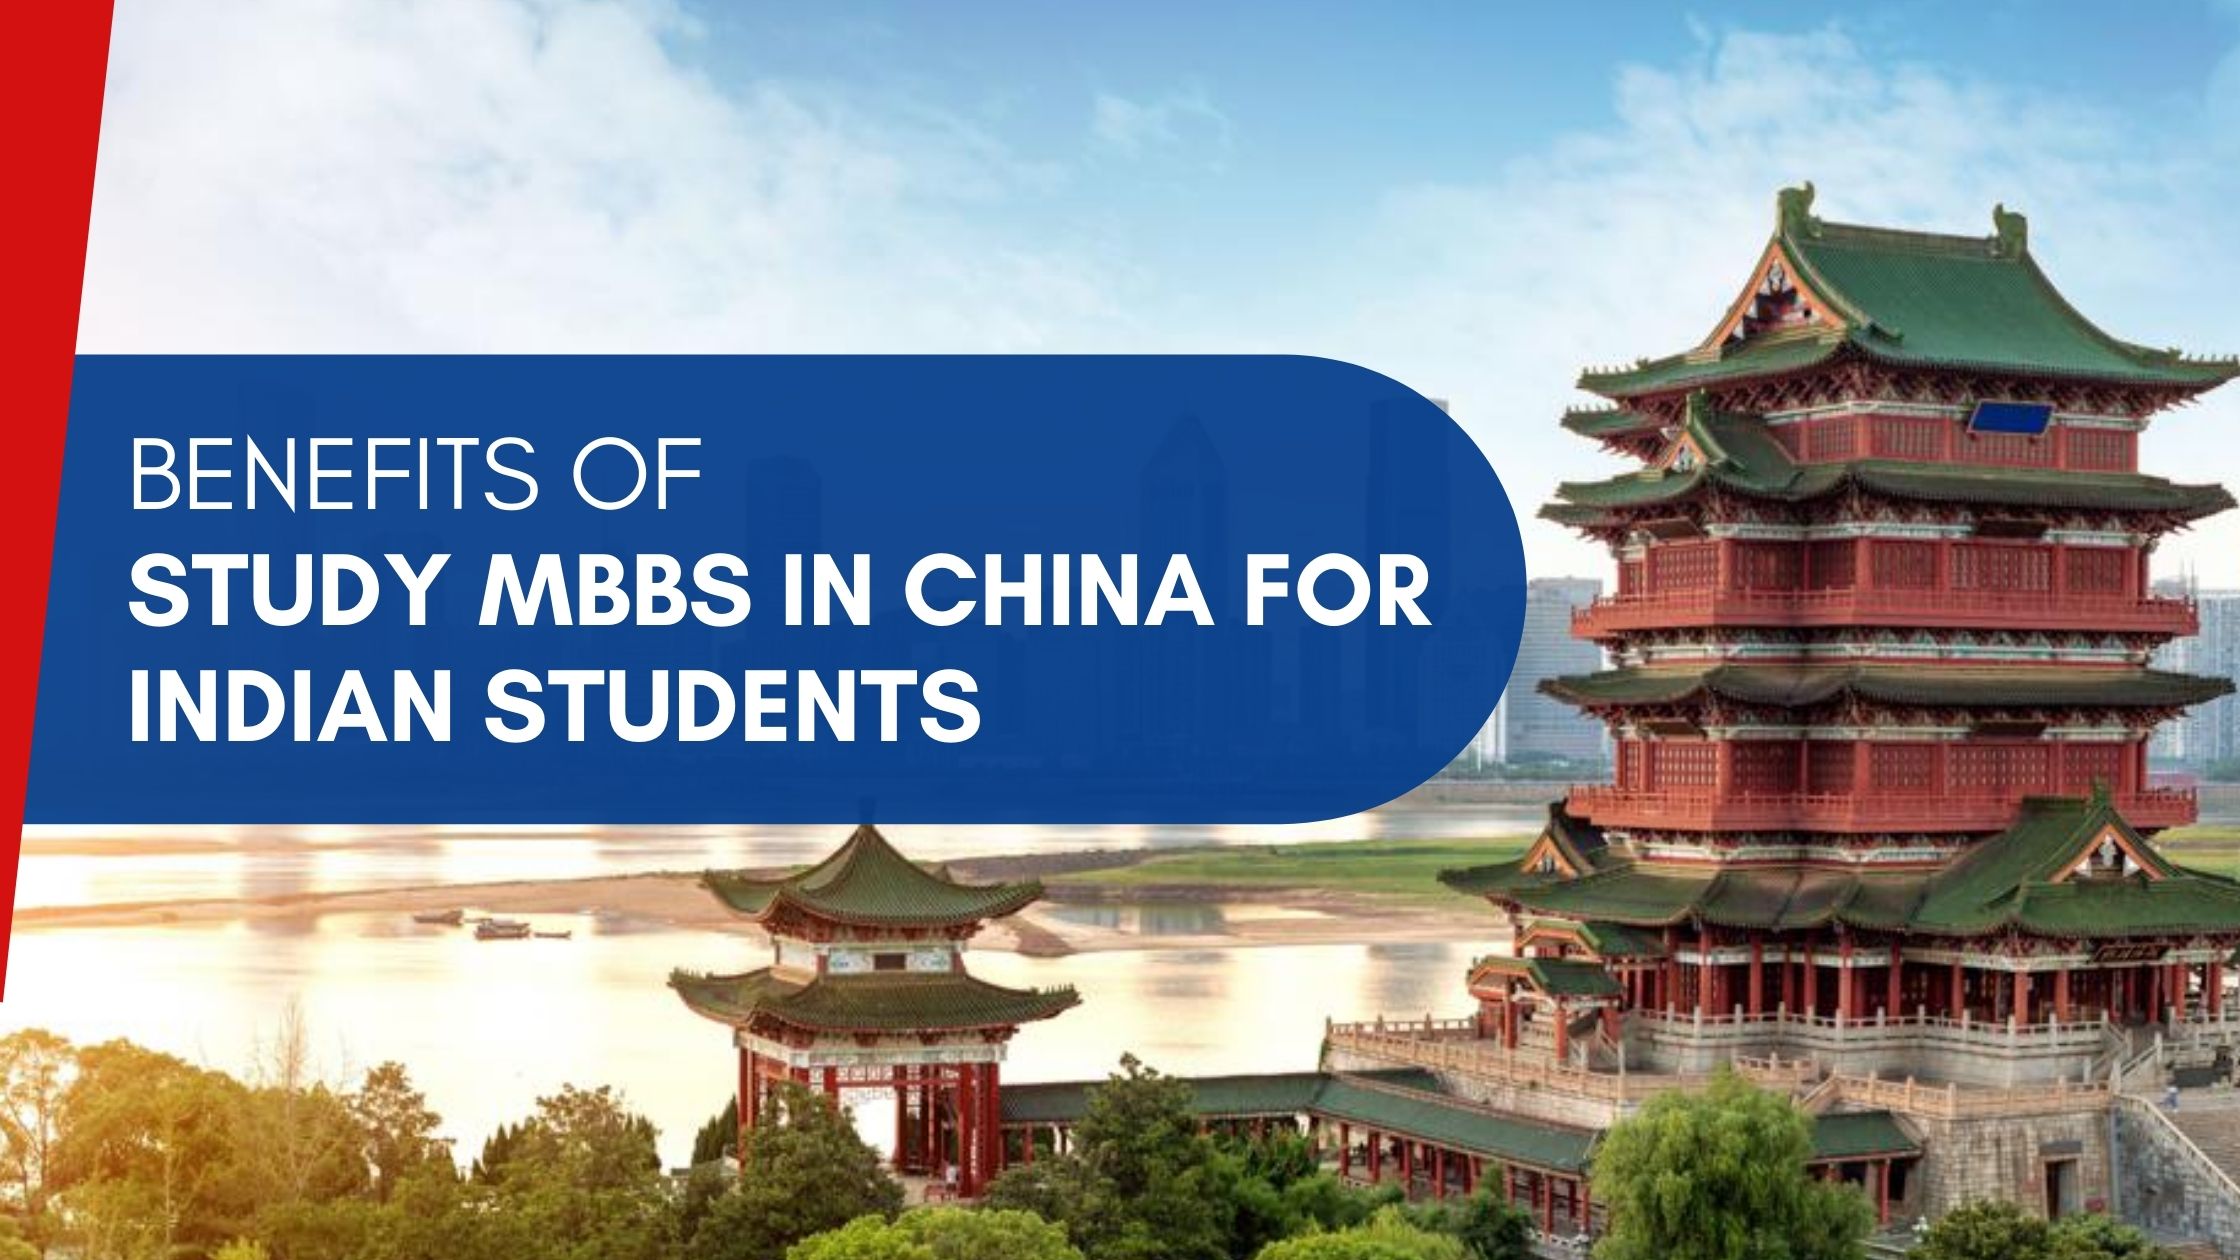 Benefits of Study MBBS in China for Indian Students